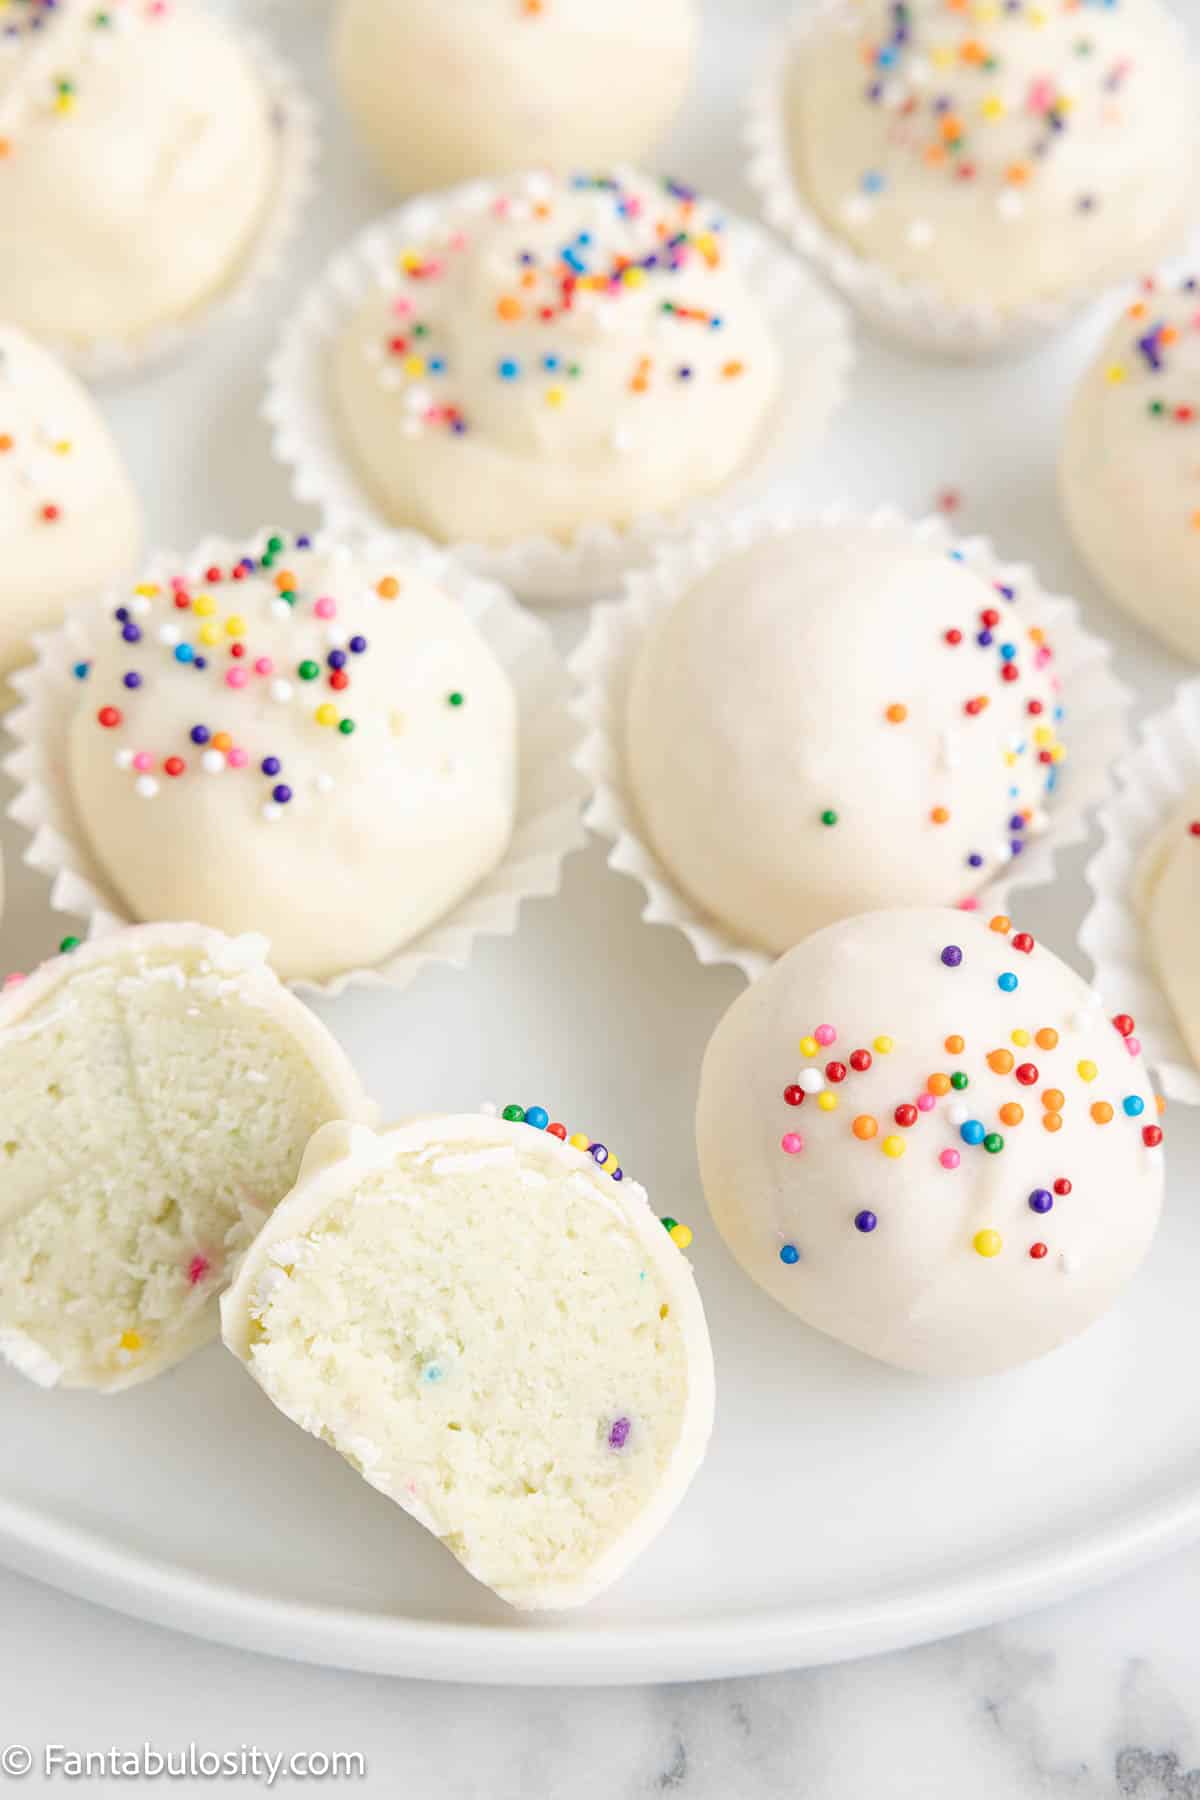 Showing the inside of a sugar cookie truffle on a white plate, sitting next to whole truffles.